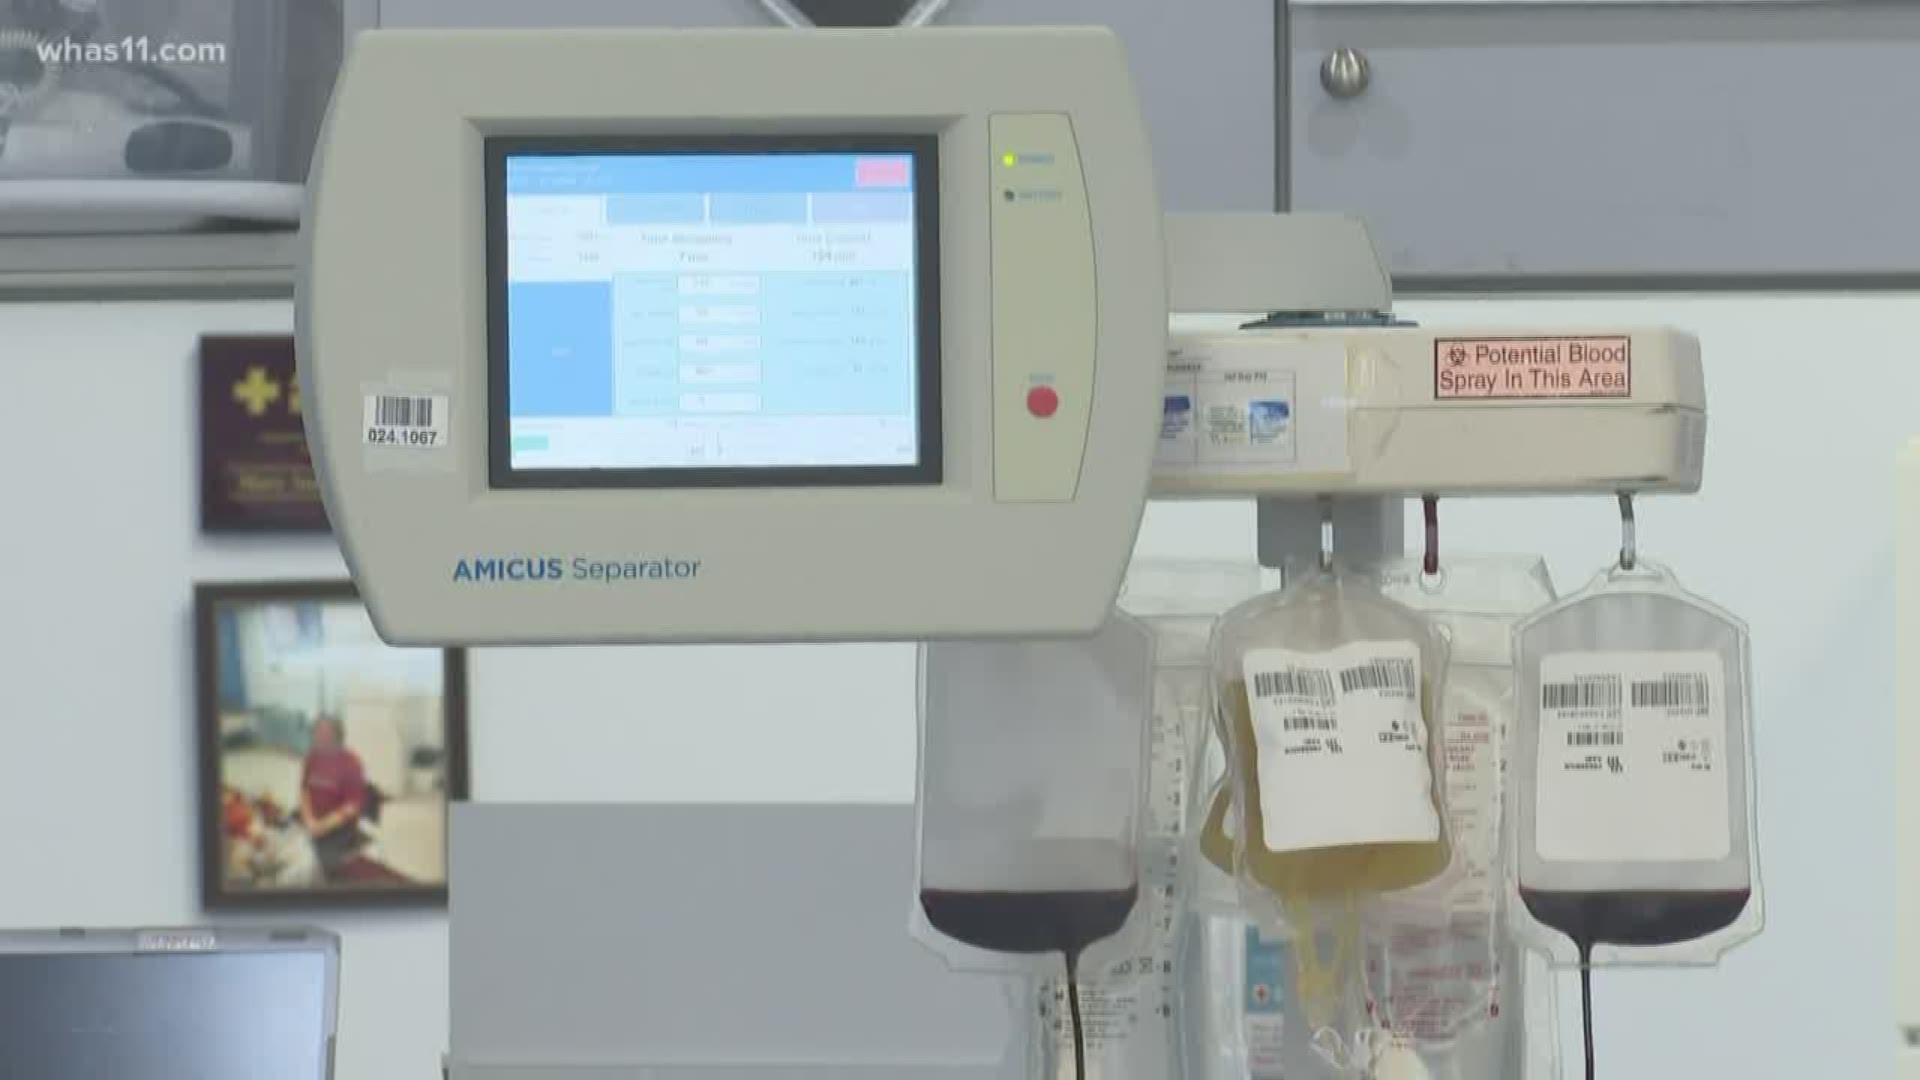 As the number of coronavirus cases grows in the U.S. the Red Cross says the number of people eligible to give blood for those in need could decrease further.